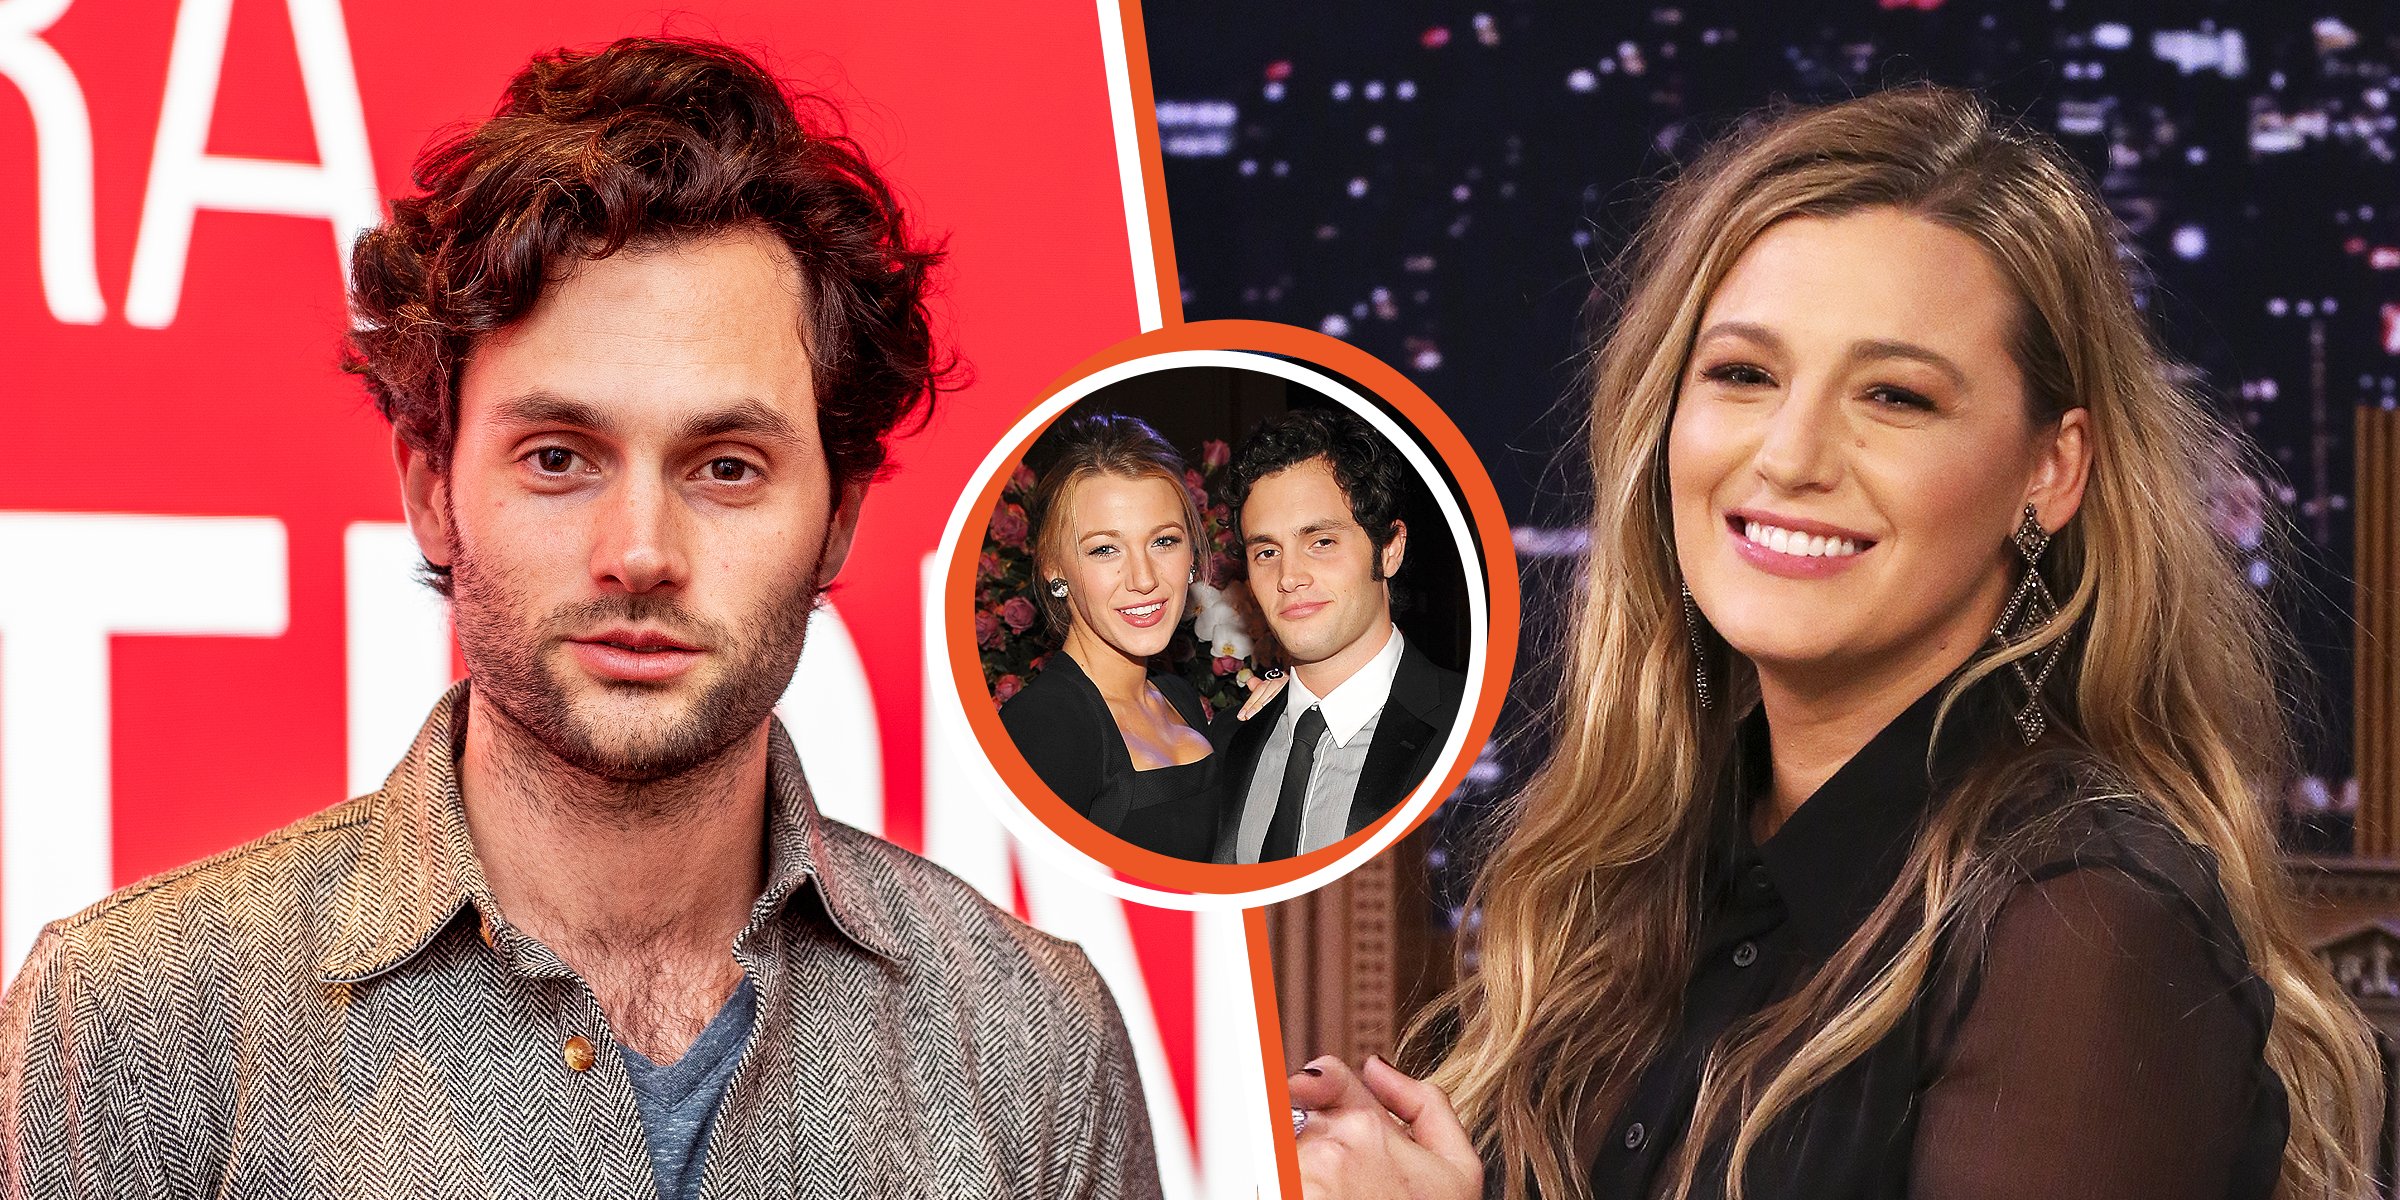 Penn Badgley and Blake Lively | Source: Getty Images